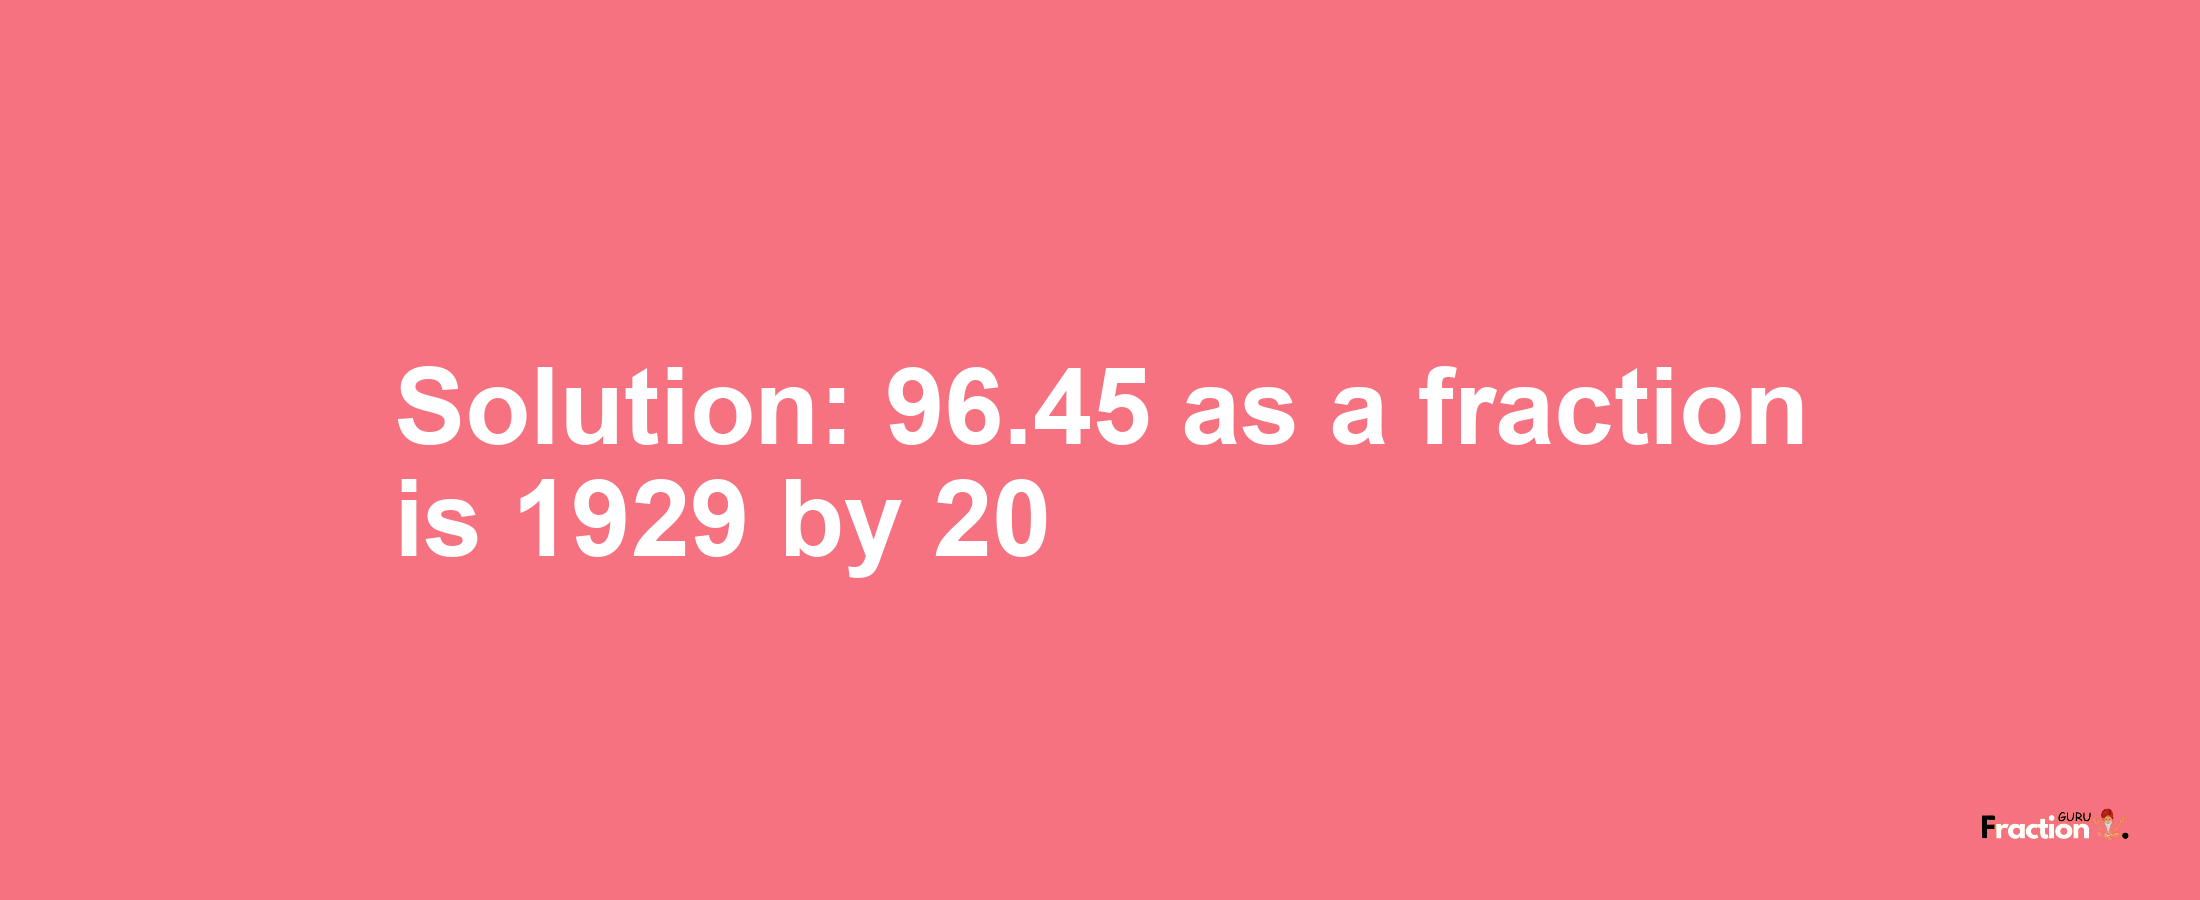 Solution:96.45 as a fraction is 1929/20